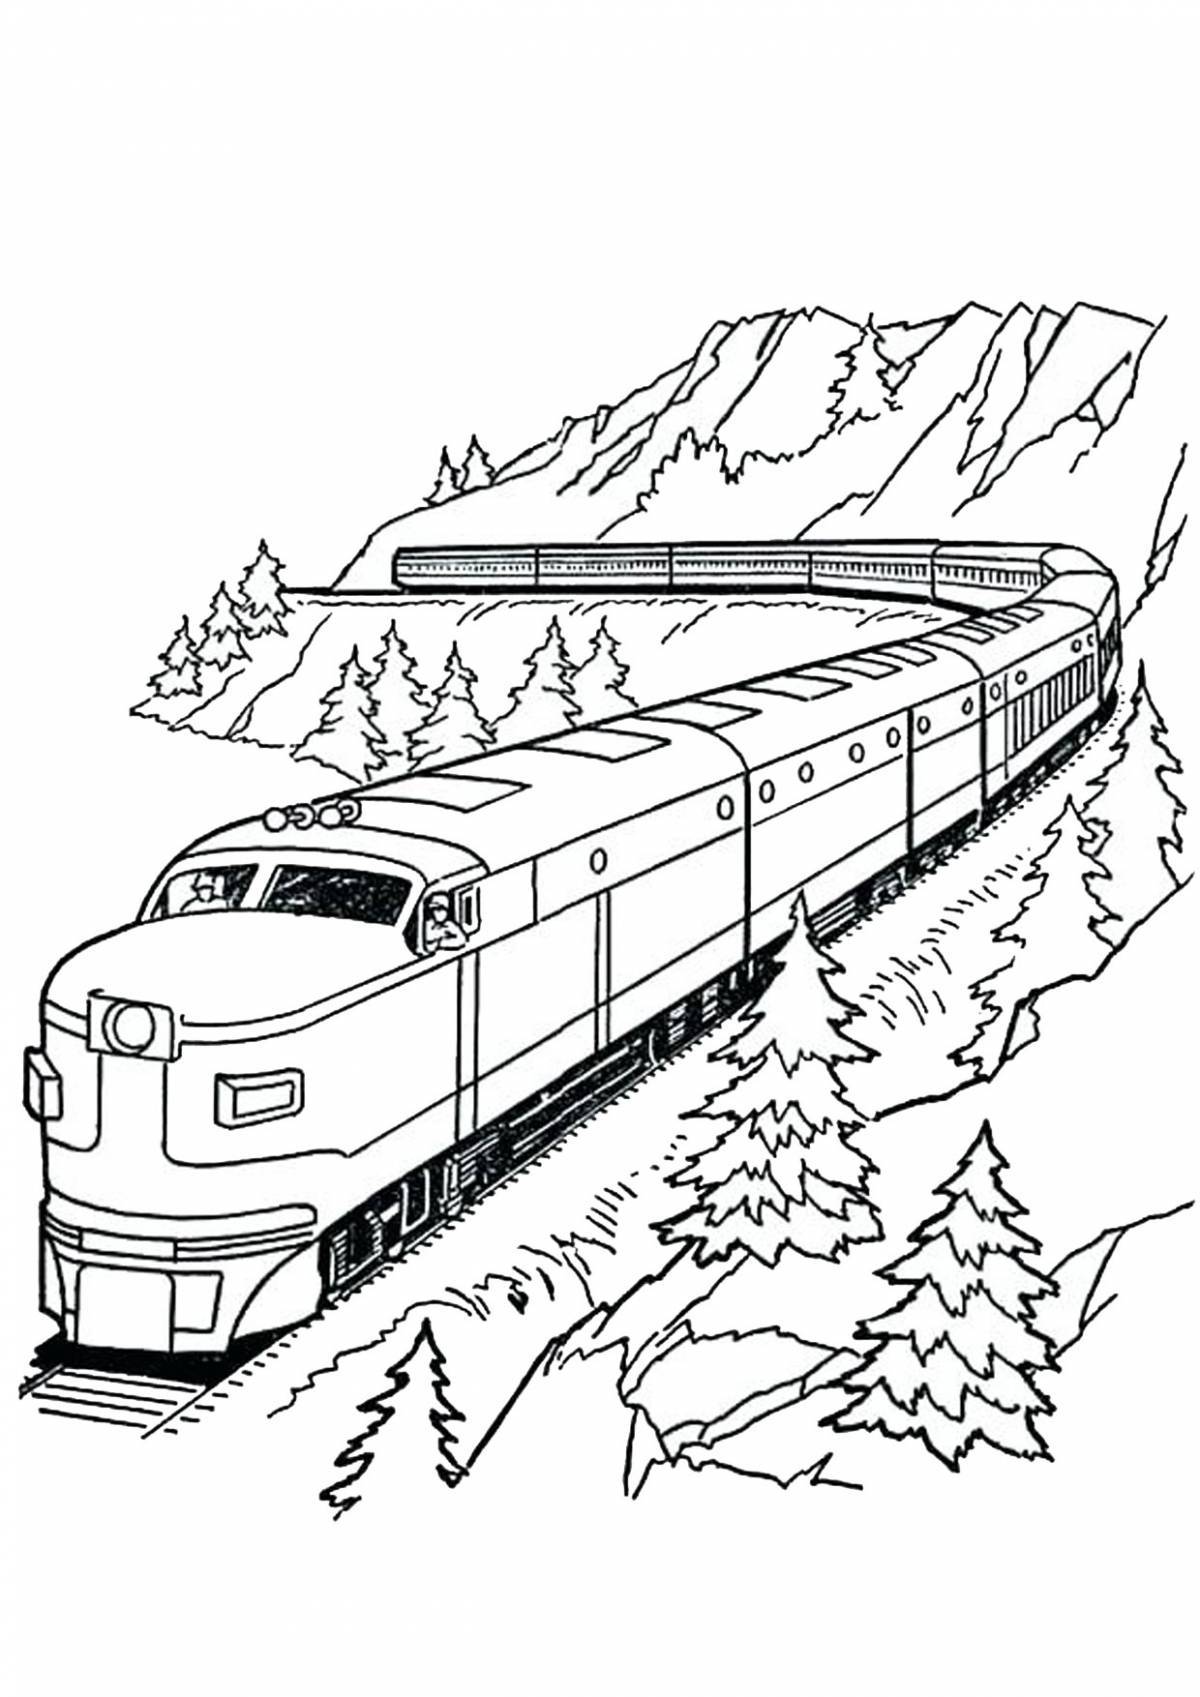 Dynamic train coloring page